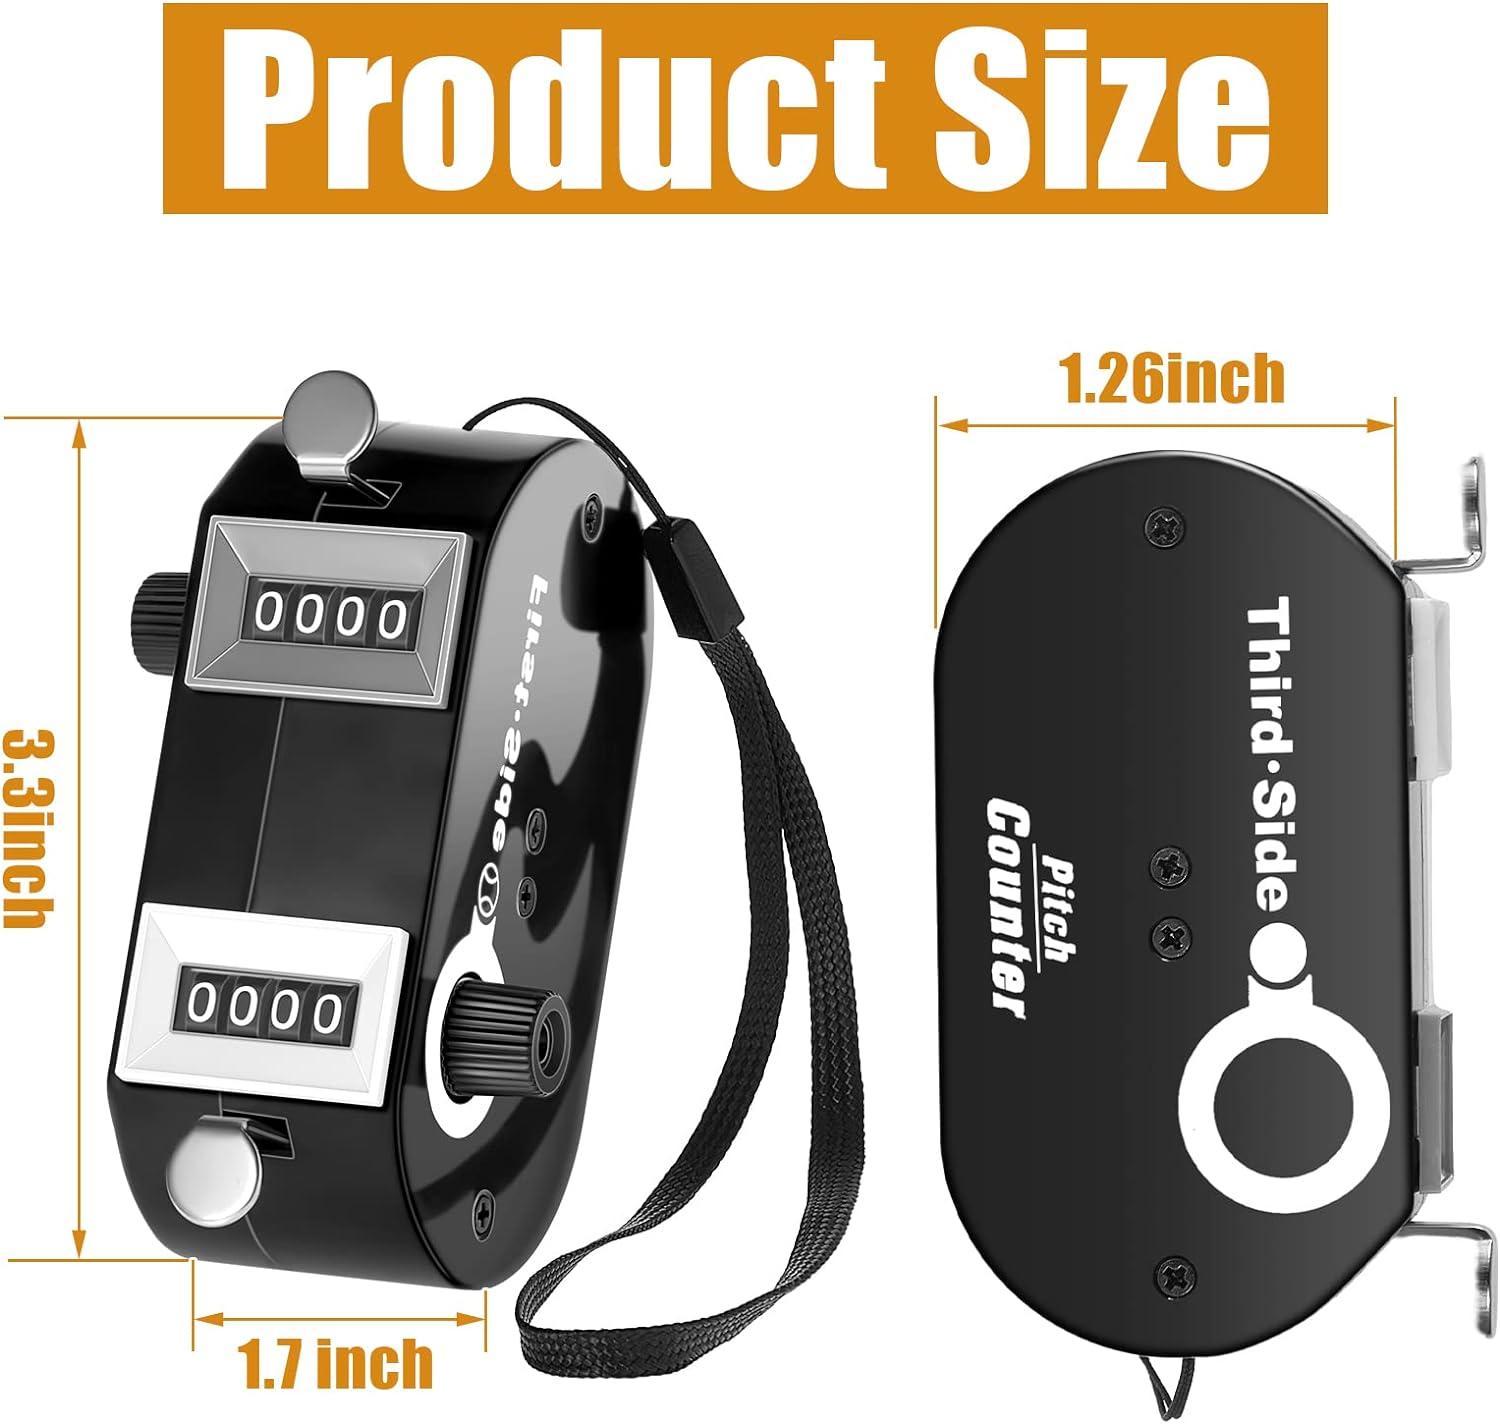 2 PCS Digital Tally Counter Electronic Hand Held Clicker Sports Counter  Add/ Sub